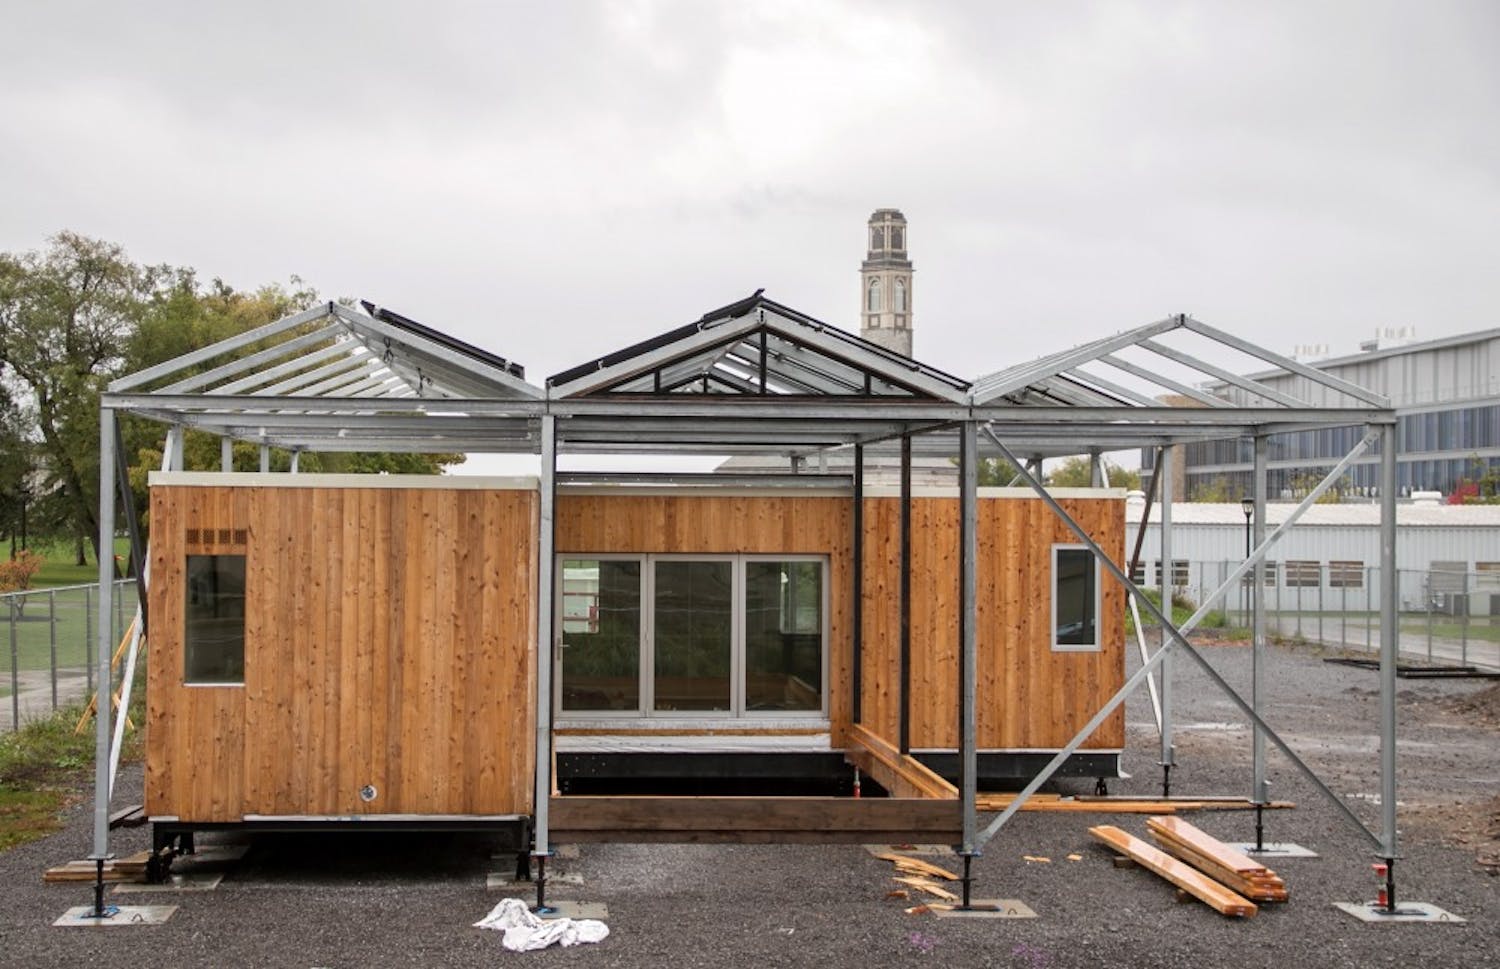 After making its 2,500 mile journey from Irvine, California, UB's award winning GRoW Home is being reconstructed on South Campus, adjacent from Haynes Hall.